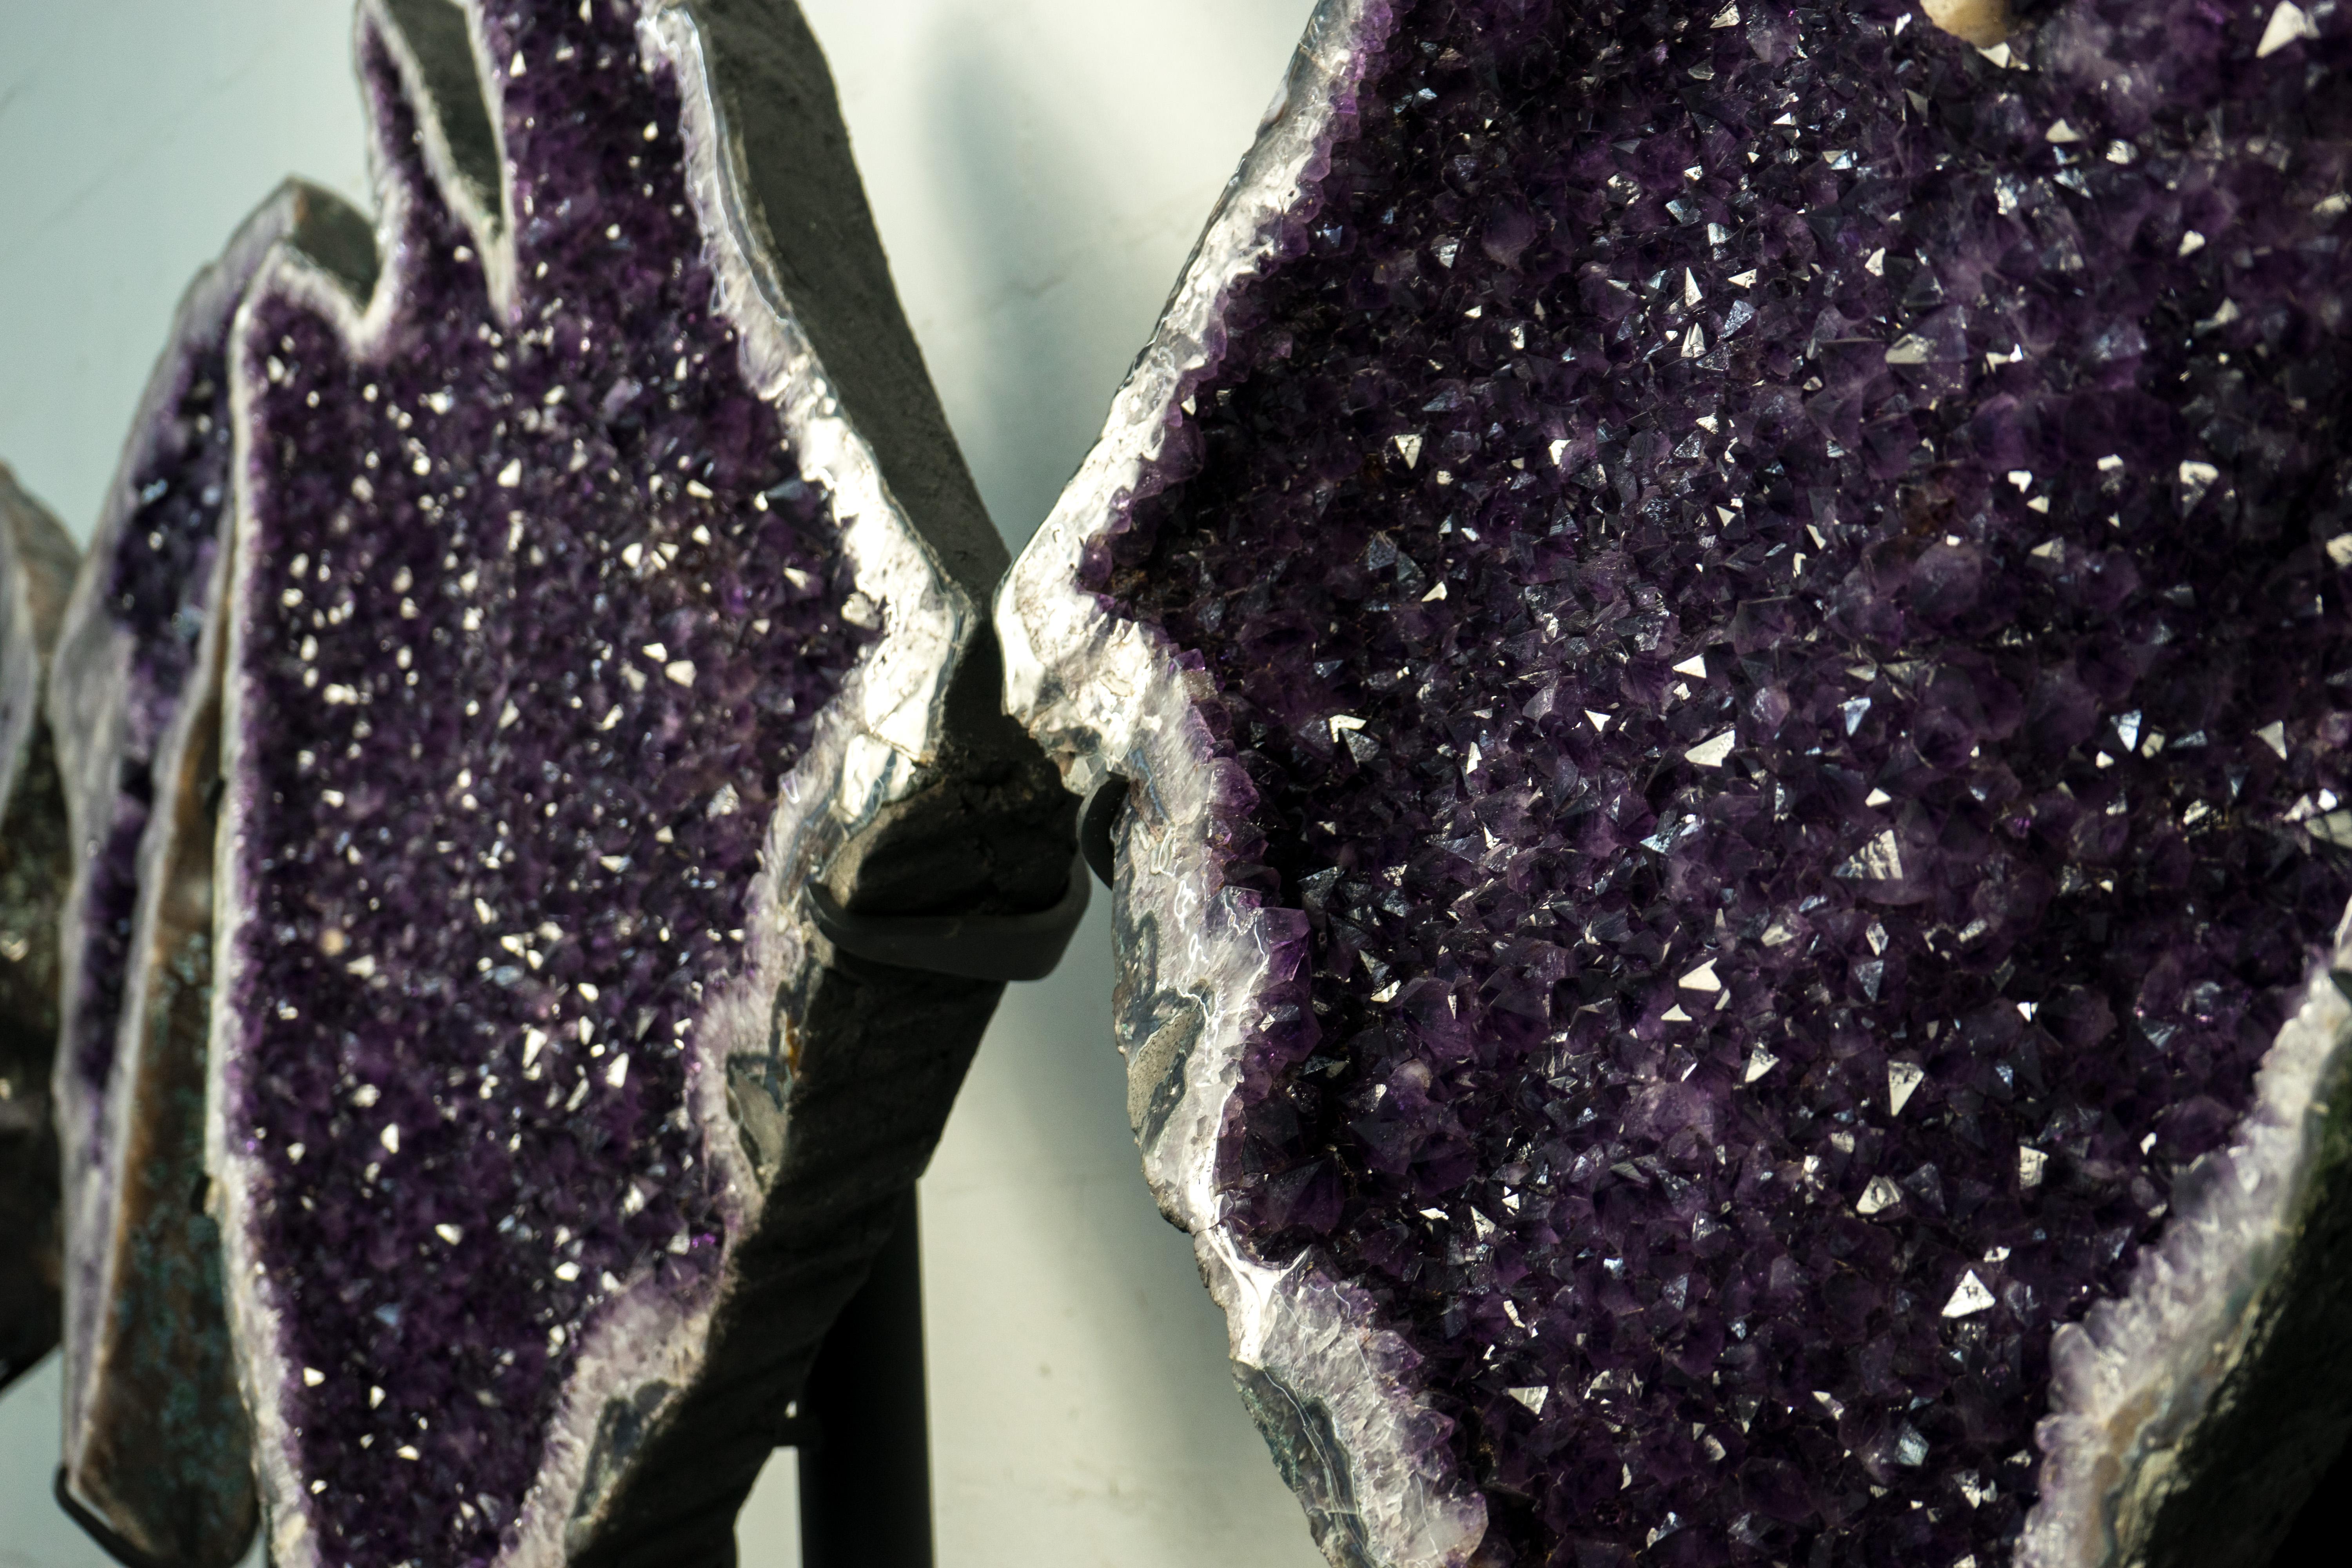 Sculptural 7 Ft Tall Giant Amethyst Geodes with High-Grade Deep Purple Amethyst For Sale 6